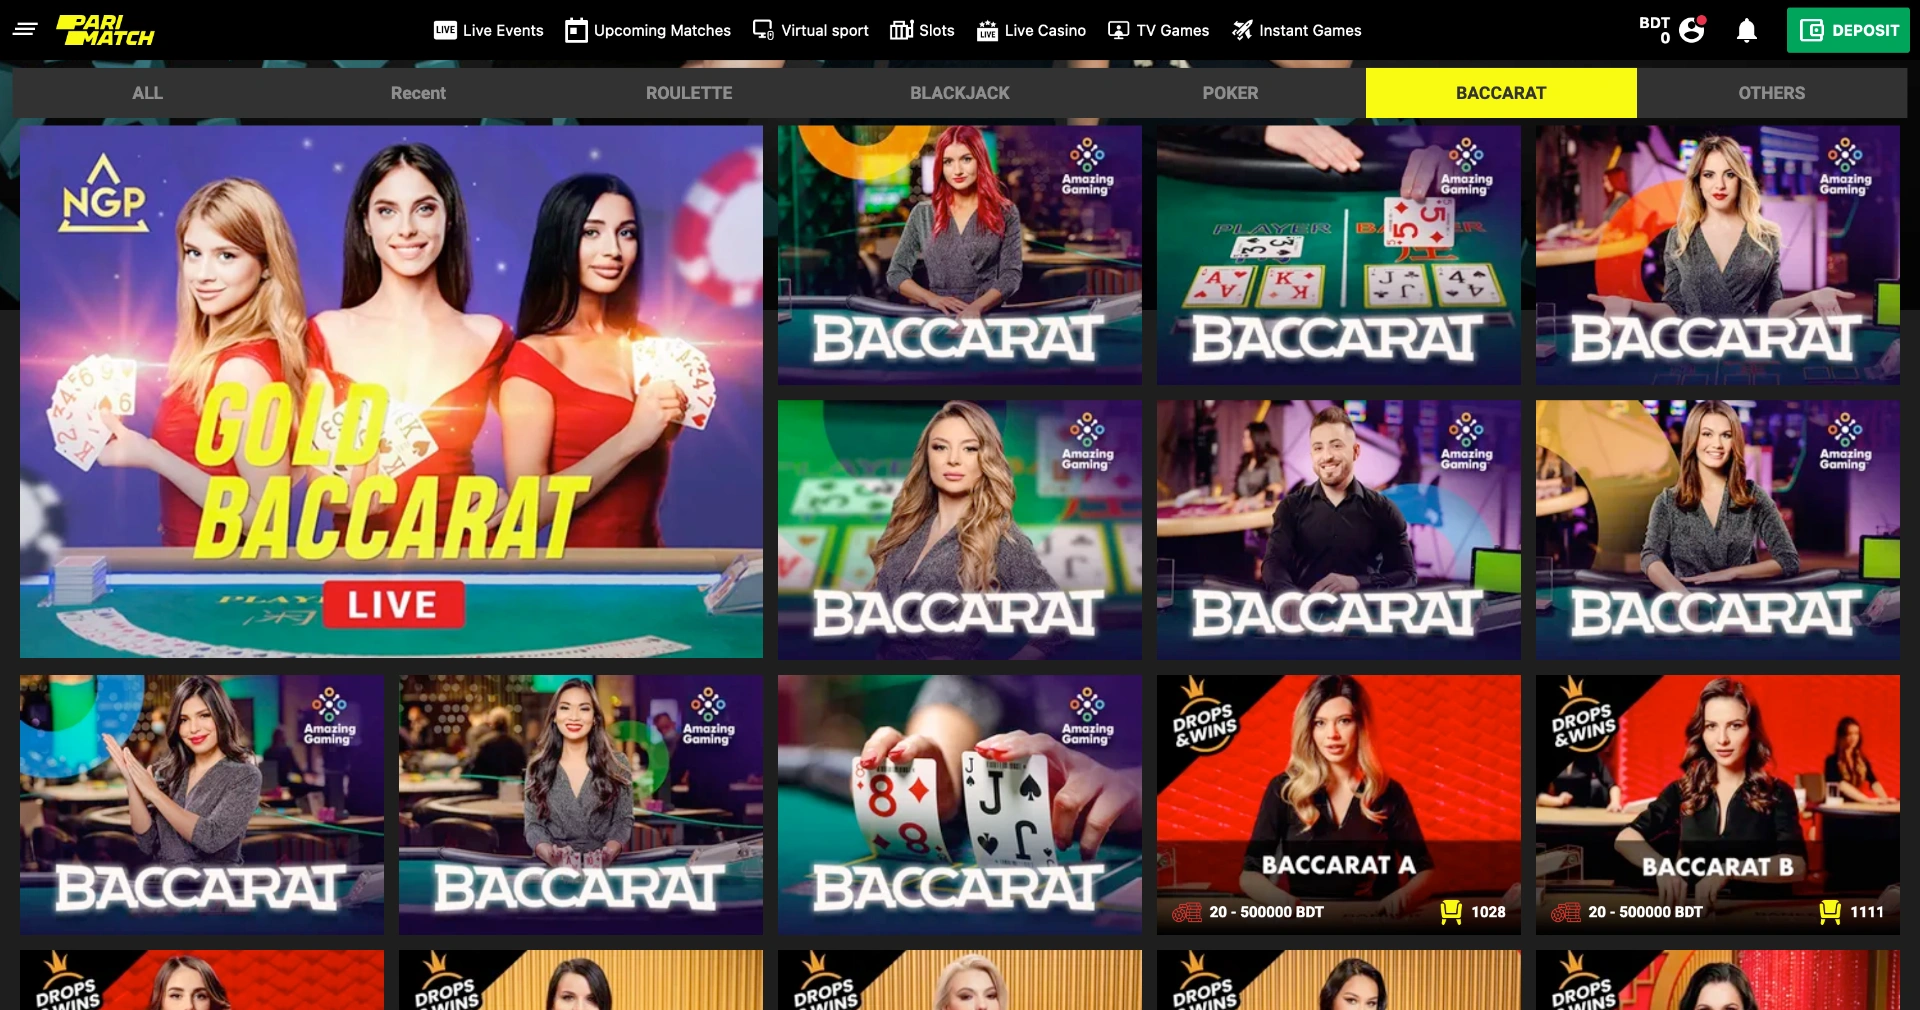 Choose the version of Baccarat that suits you best at Parimatch